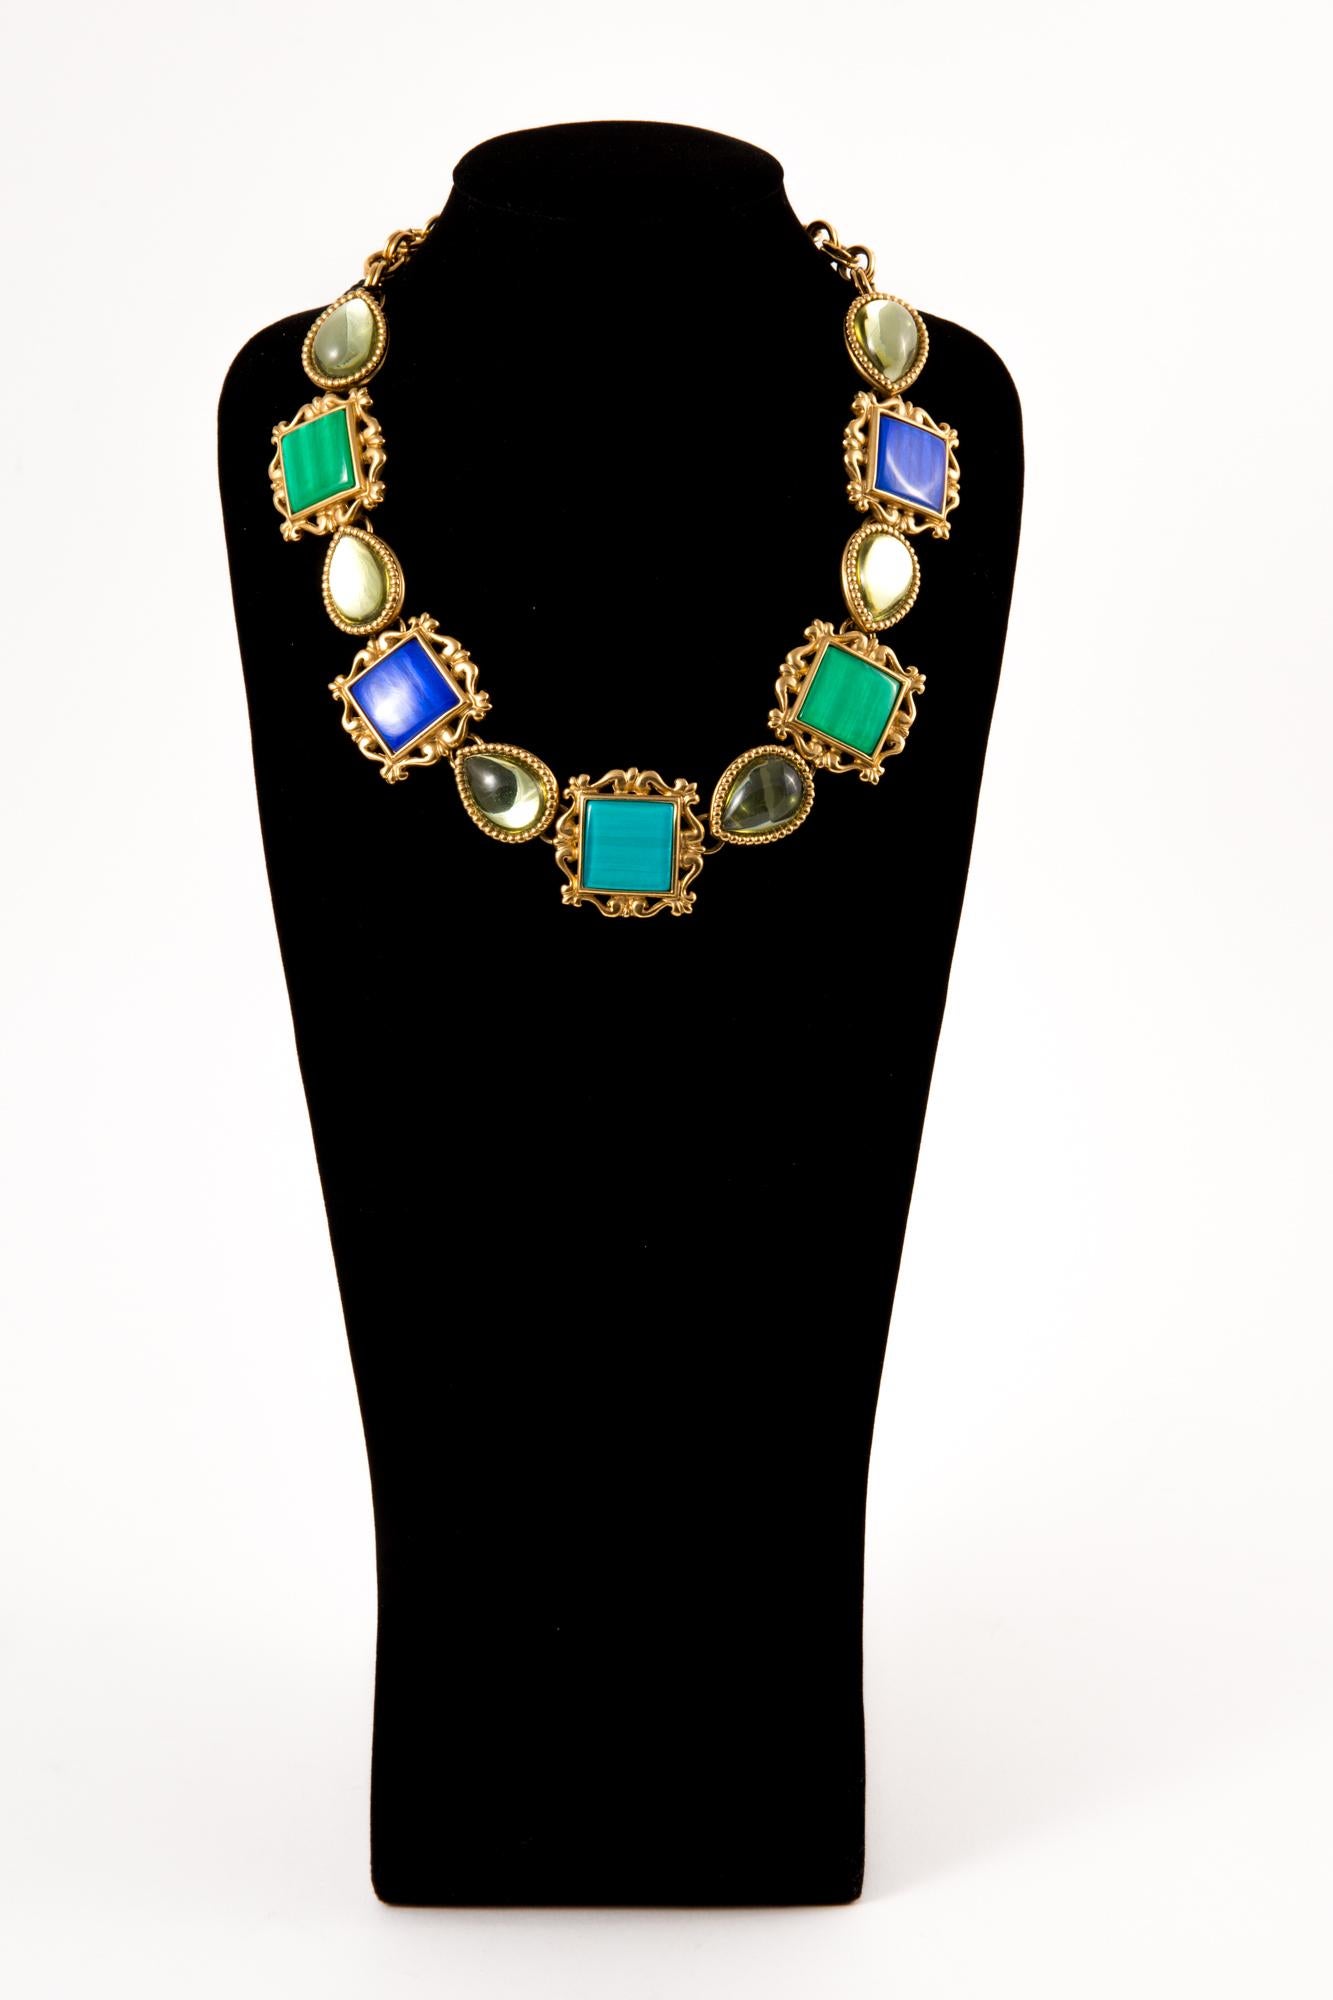 Yves Saint Laurent multicolor necklace featuring gold-plated parts, glass beads, blue & green stones, hearts pitted YSL to get it adjustable, a bar closing. 
Assorted clip-on earrings available on 1st Dibs.
Circa: 1980s
In excellent vintage